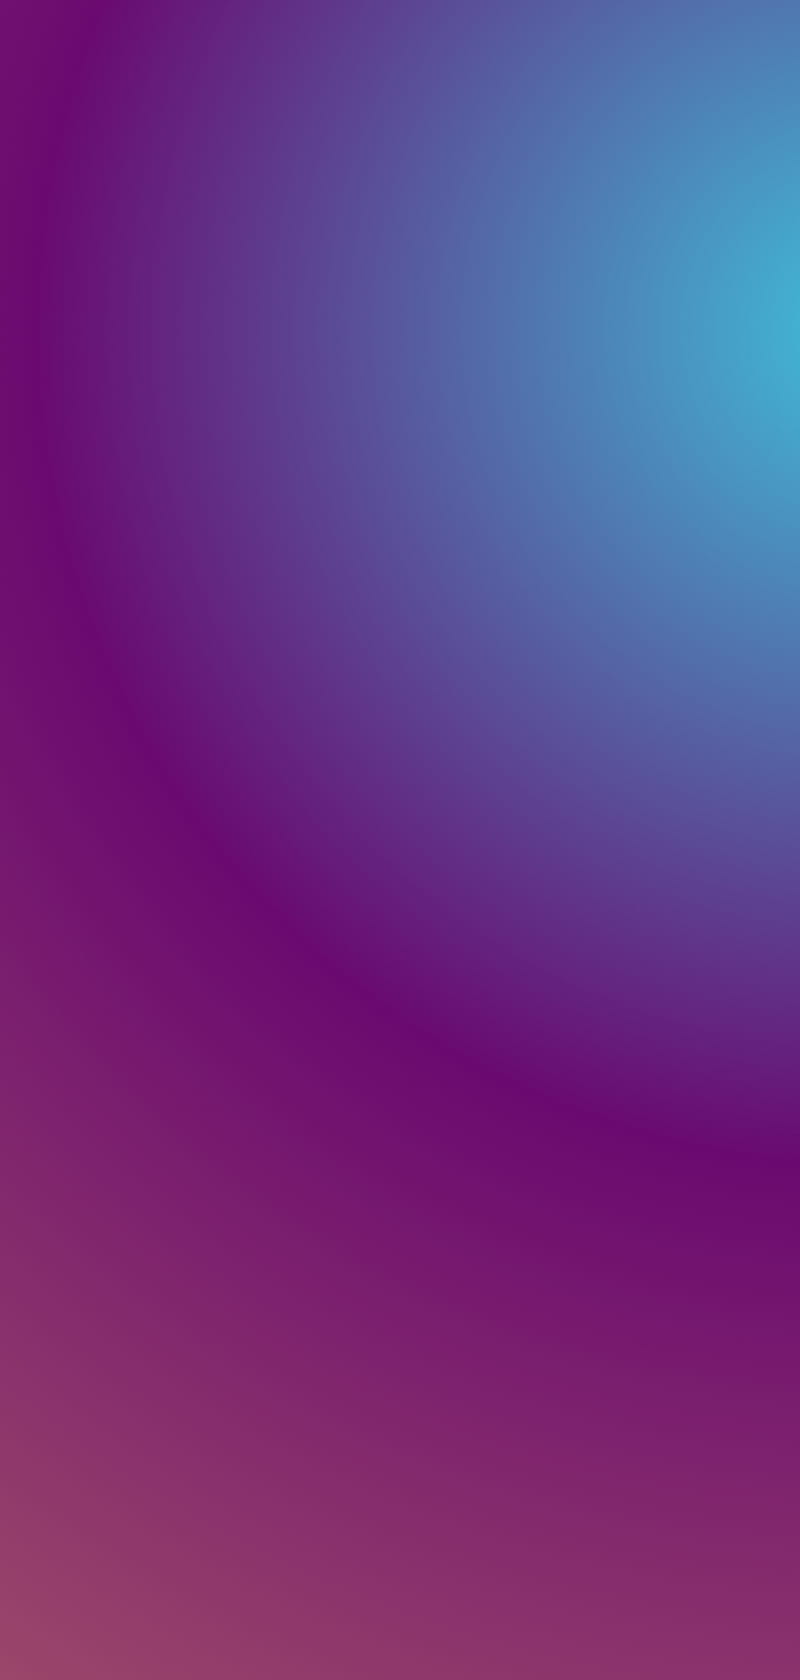 Color Gradient Blue, Aurel, Color, abstract, amoled, android, art, aura, aurora, background, blue, blur, blurry, calm, colorful, colors, colours, cool, dark, fresh, gradient, ios, minimal, minimalistic, modern, new, nice, oled, quality, red, simple, wallpapper, HD phone wallpaper